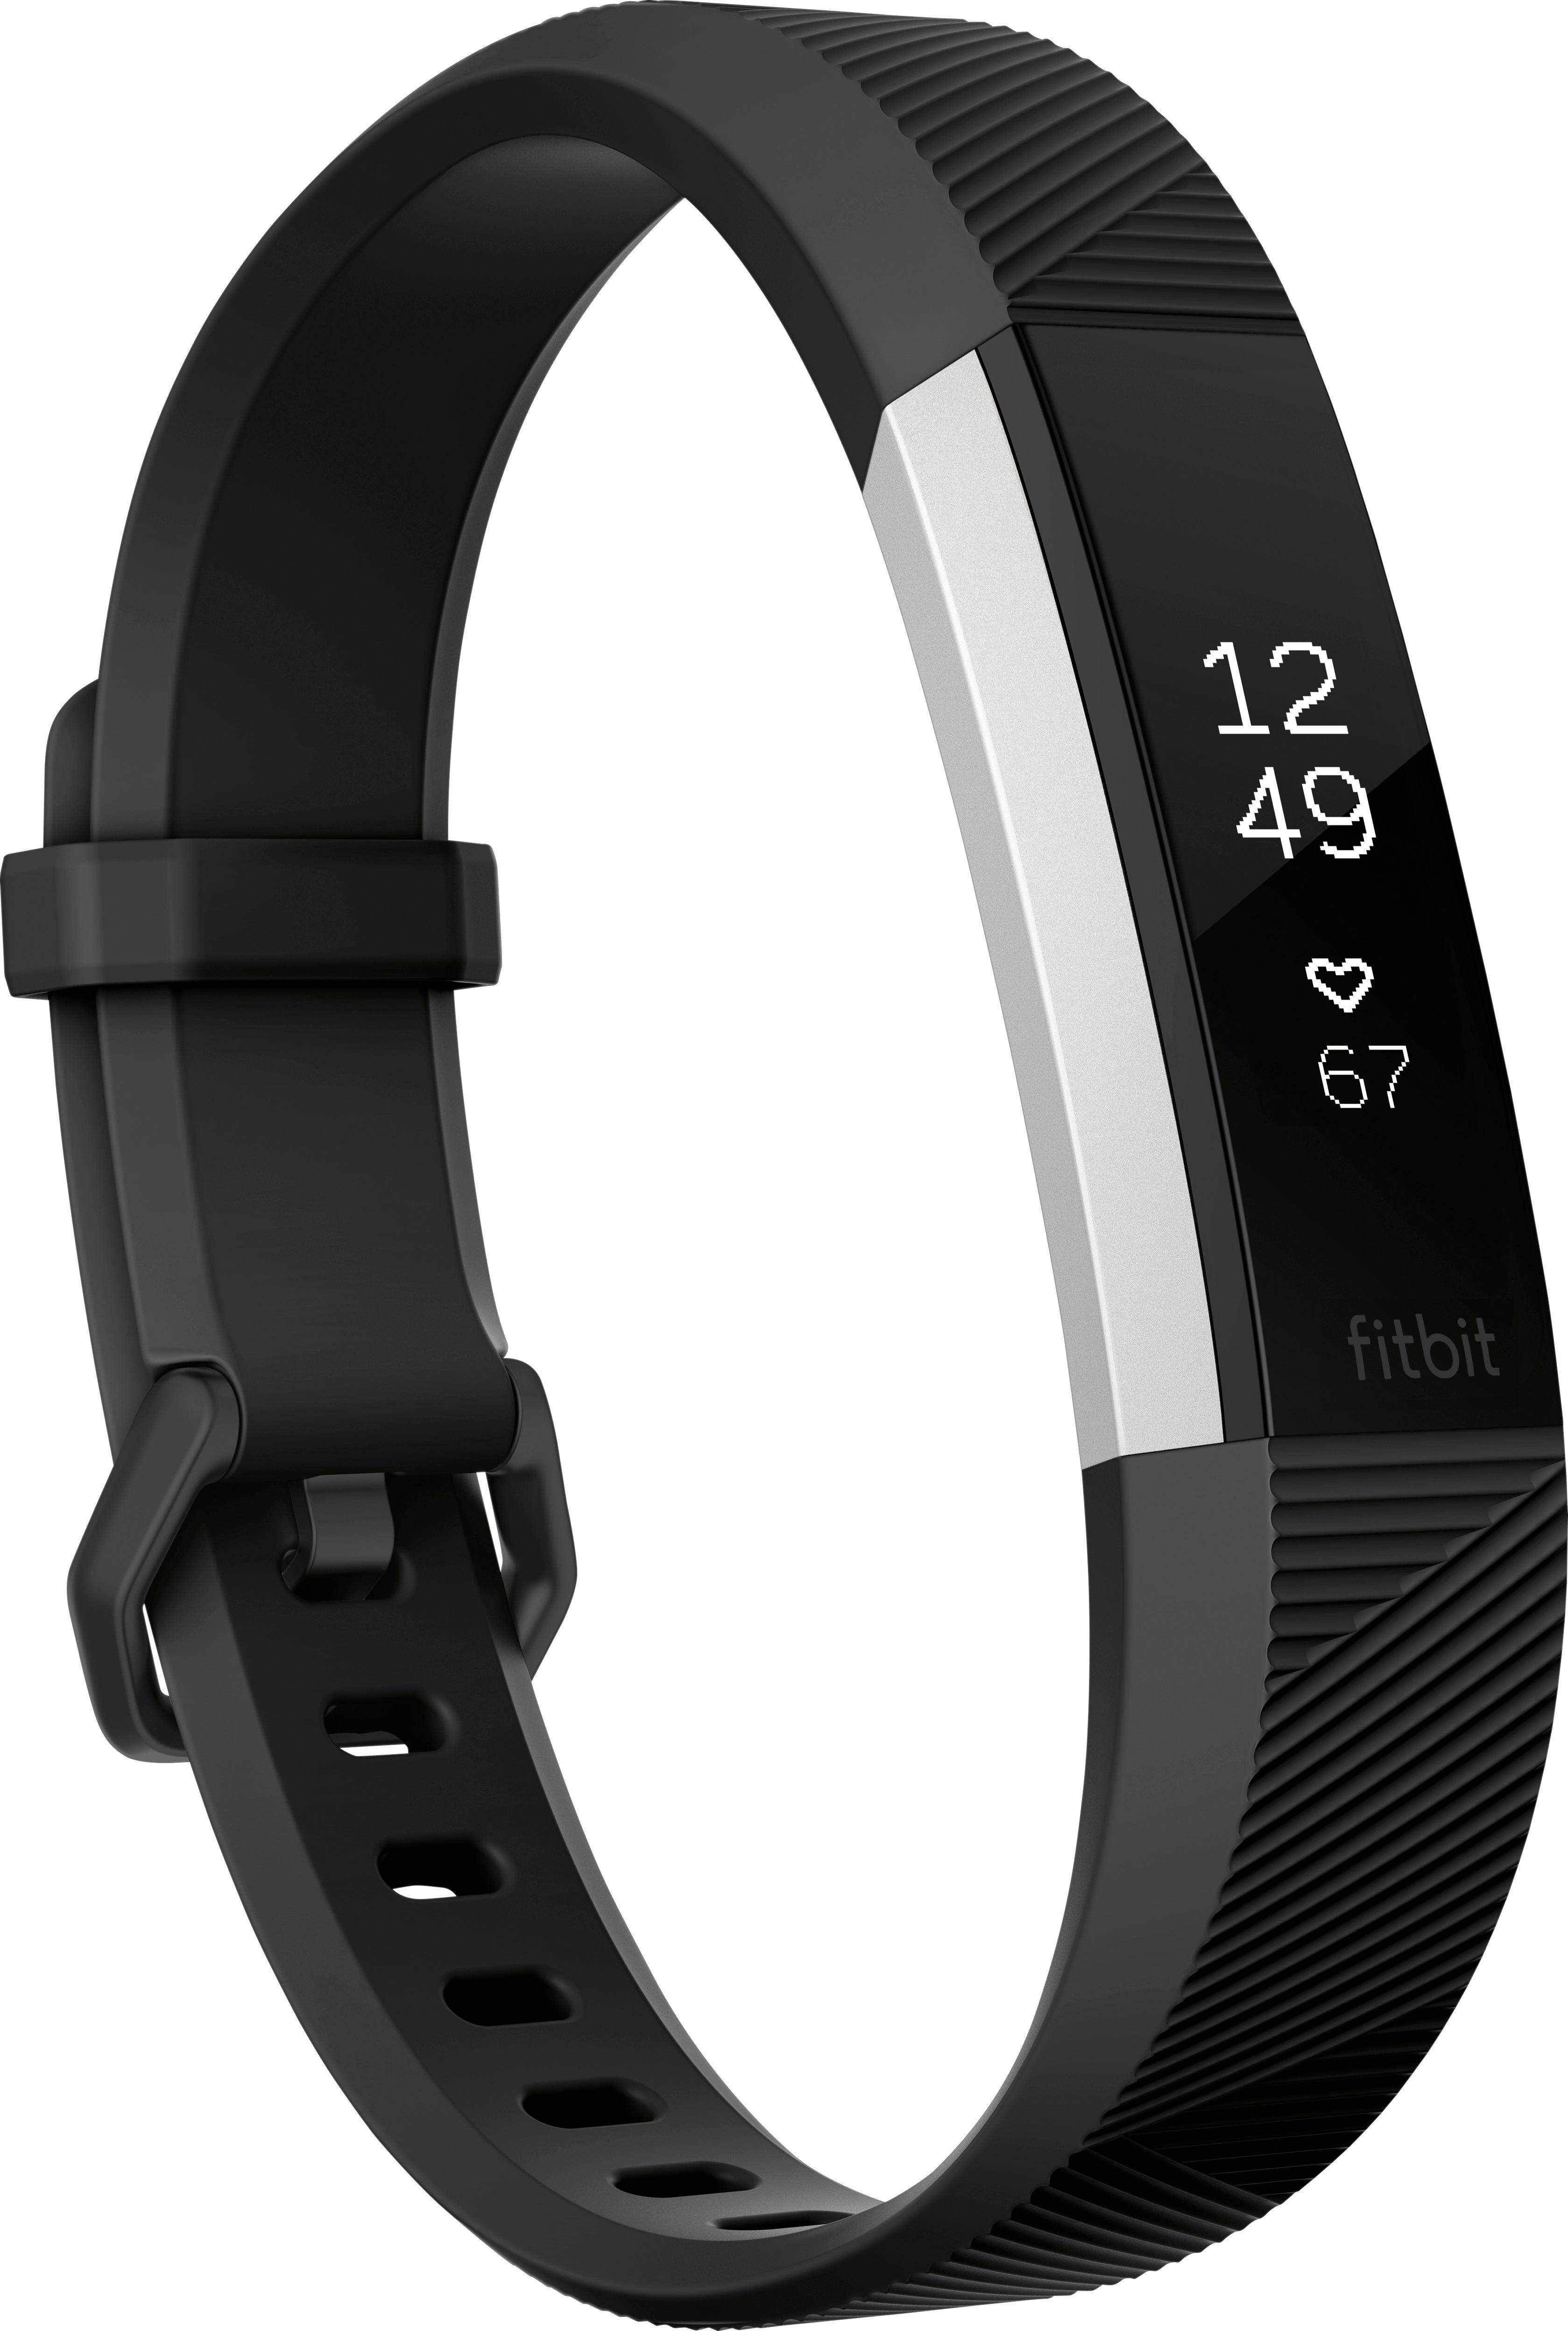 Small Fitbit Charge 2 Wristband Activity Tracker Black for sale online 